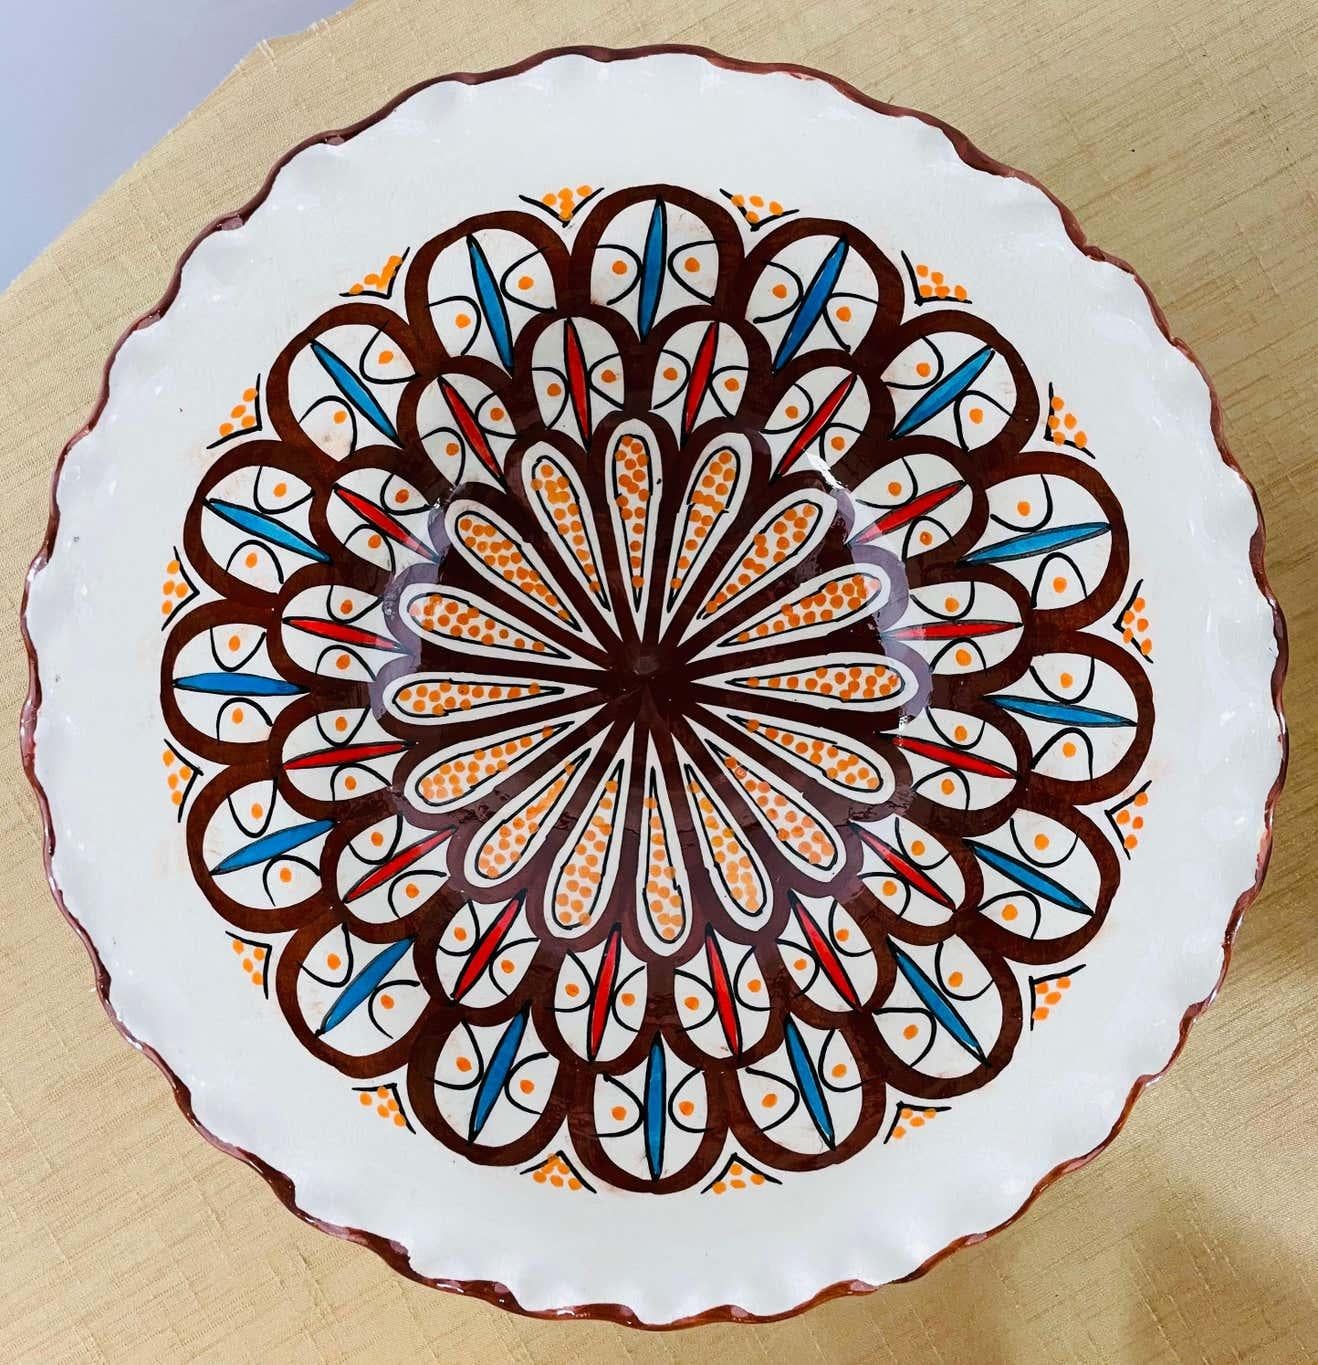 A pair of Boho Chic handmade ceramic large bowls. These stunning bowls feature an arabesque pattern and an entrancing fusion of color in white and brown handcrafted in the coastal city of Safi in Moroccan, which is renowned for its high-quality